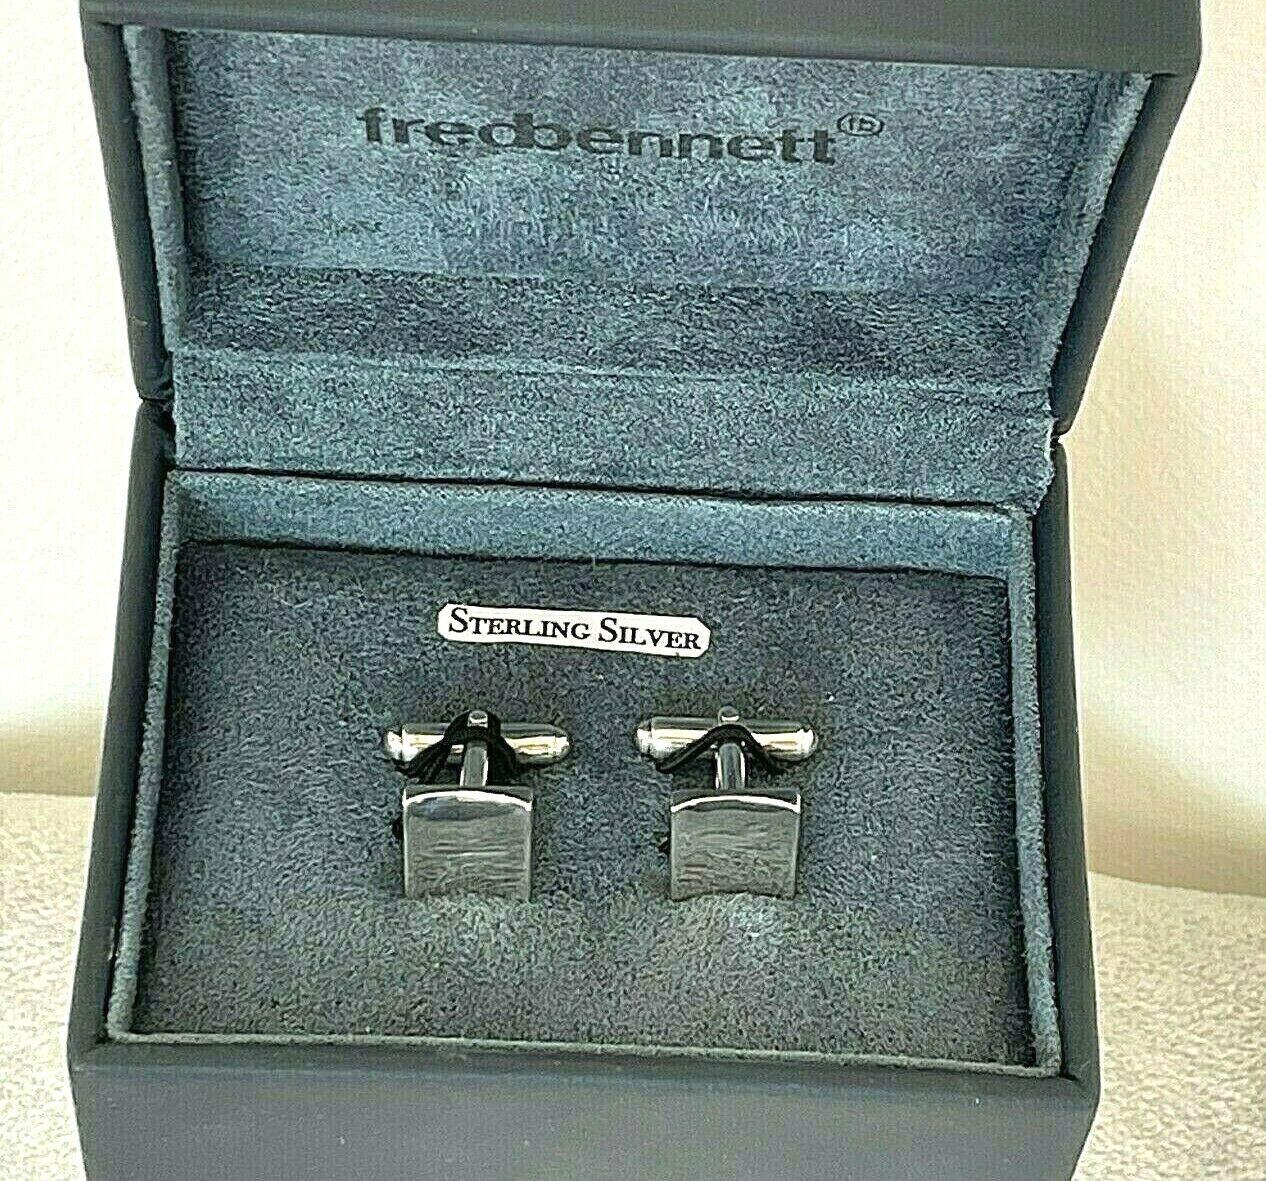 A pair of sterling silver cufflinks displayed in a jewelry case